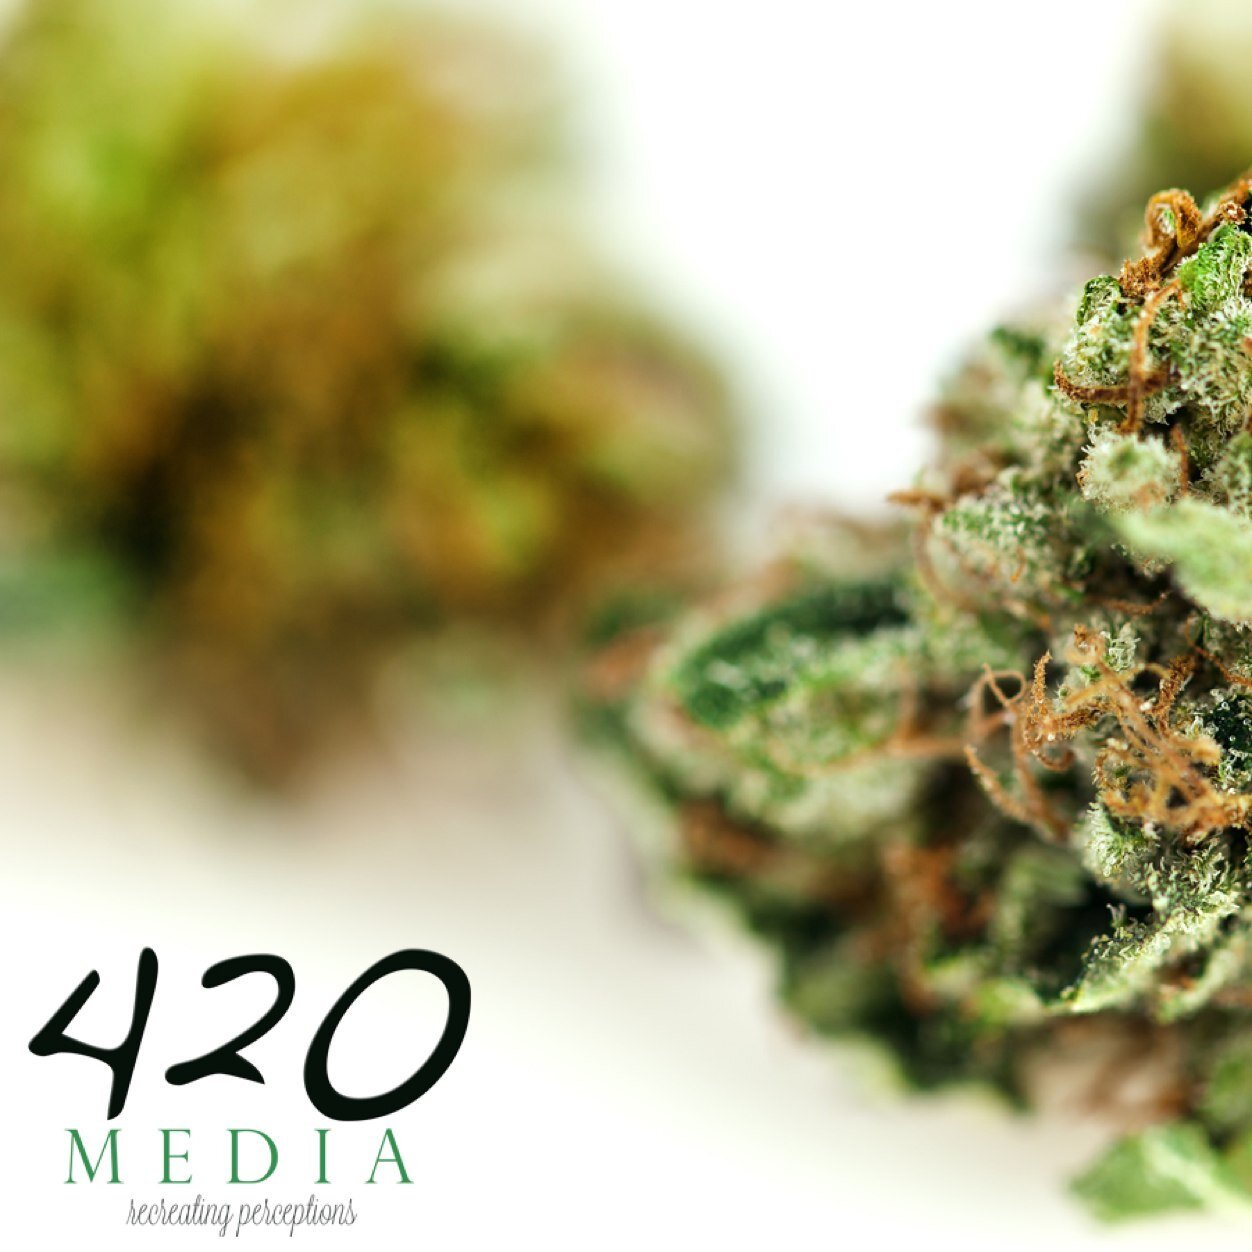 420MEDIA AGENCY is a visionary marketing firm empowering brands with cutting-edge digital strategies, compelling content, and extensive distribution.